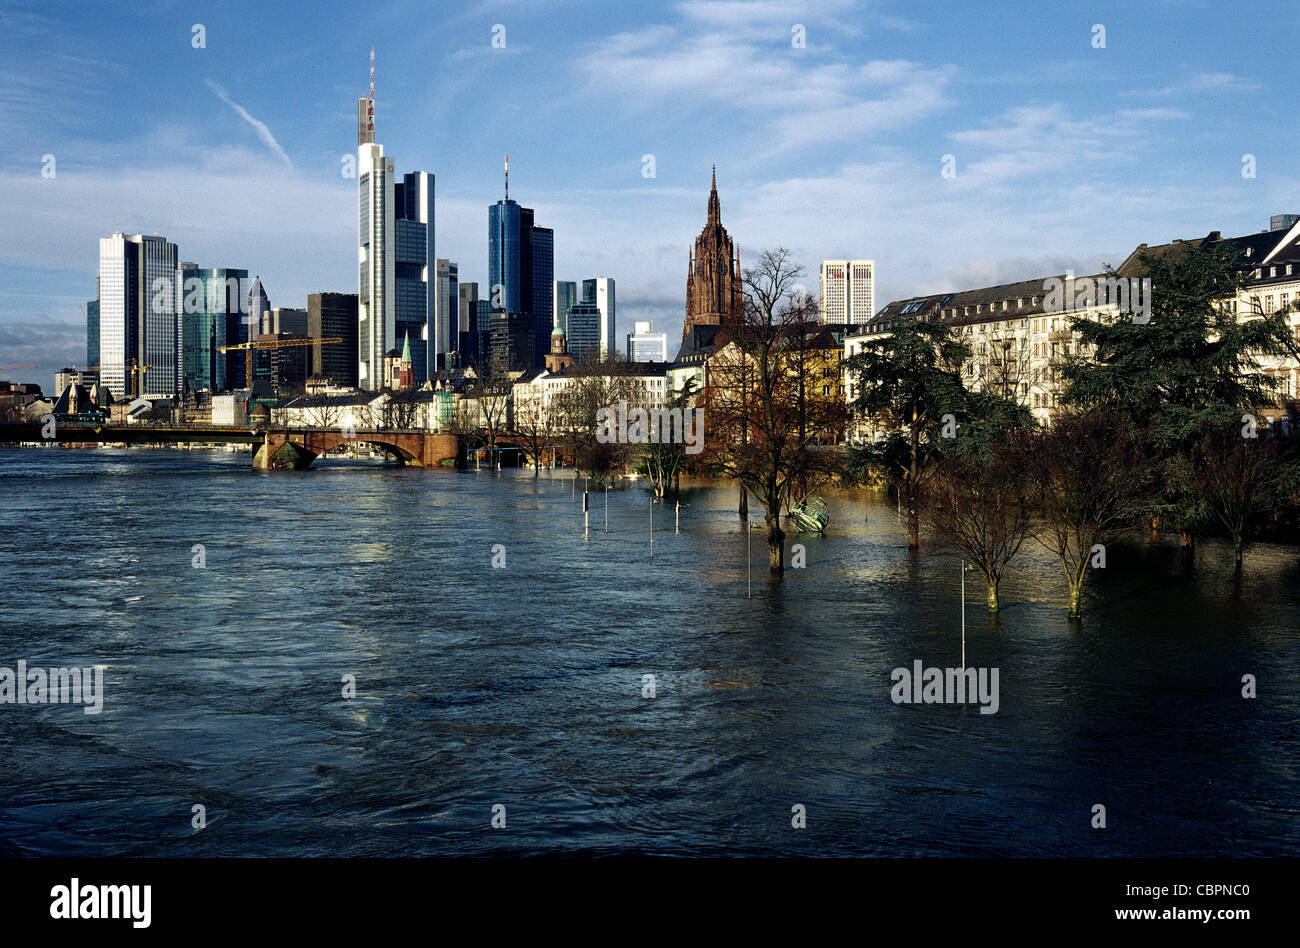 Melting snow in the south has caused the river Main to swell and flood its riverside promenade in German Frankfurt am Main. Stock Photo